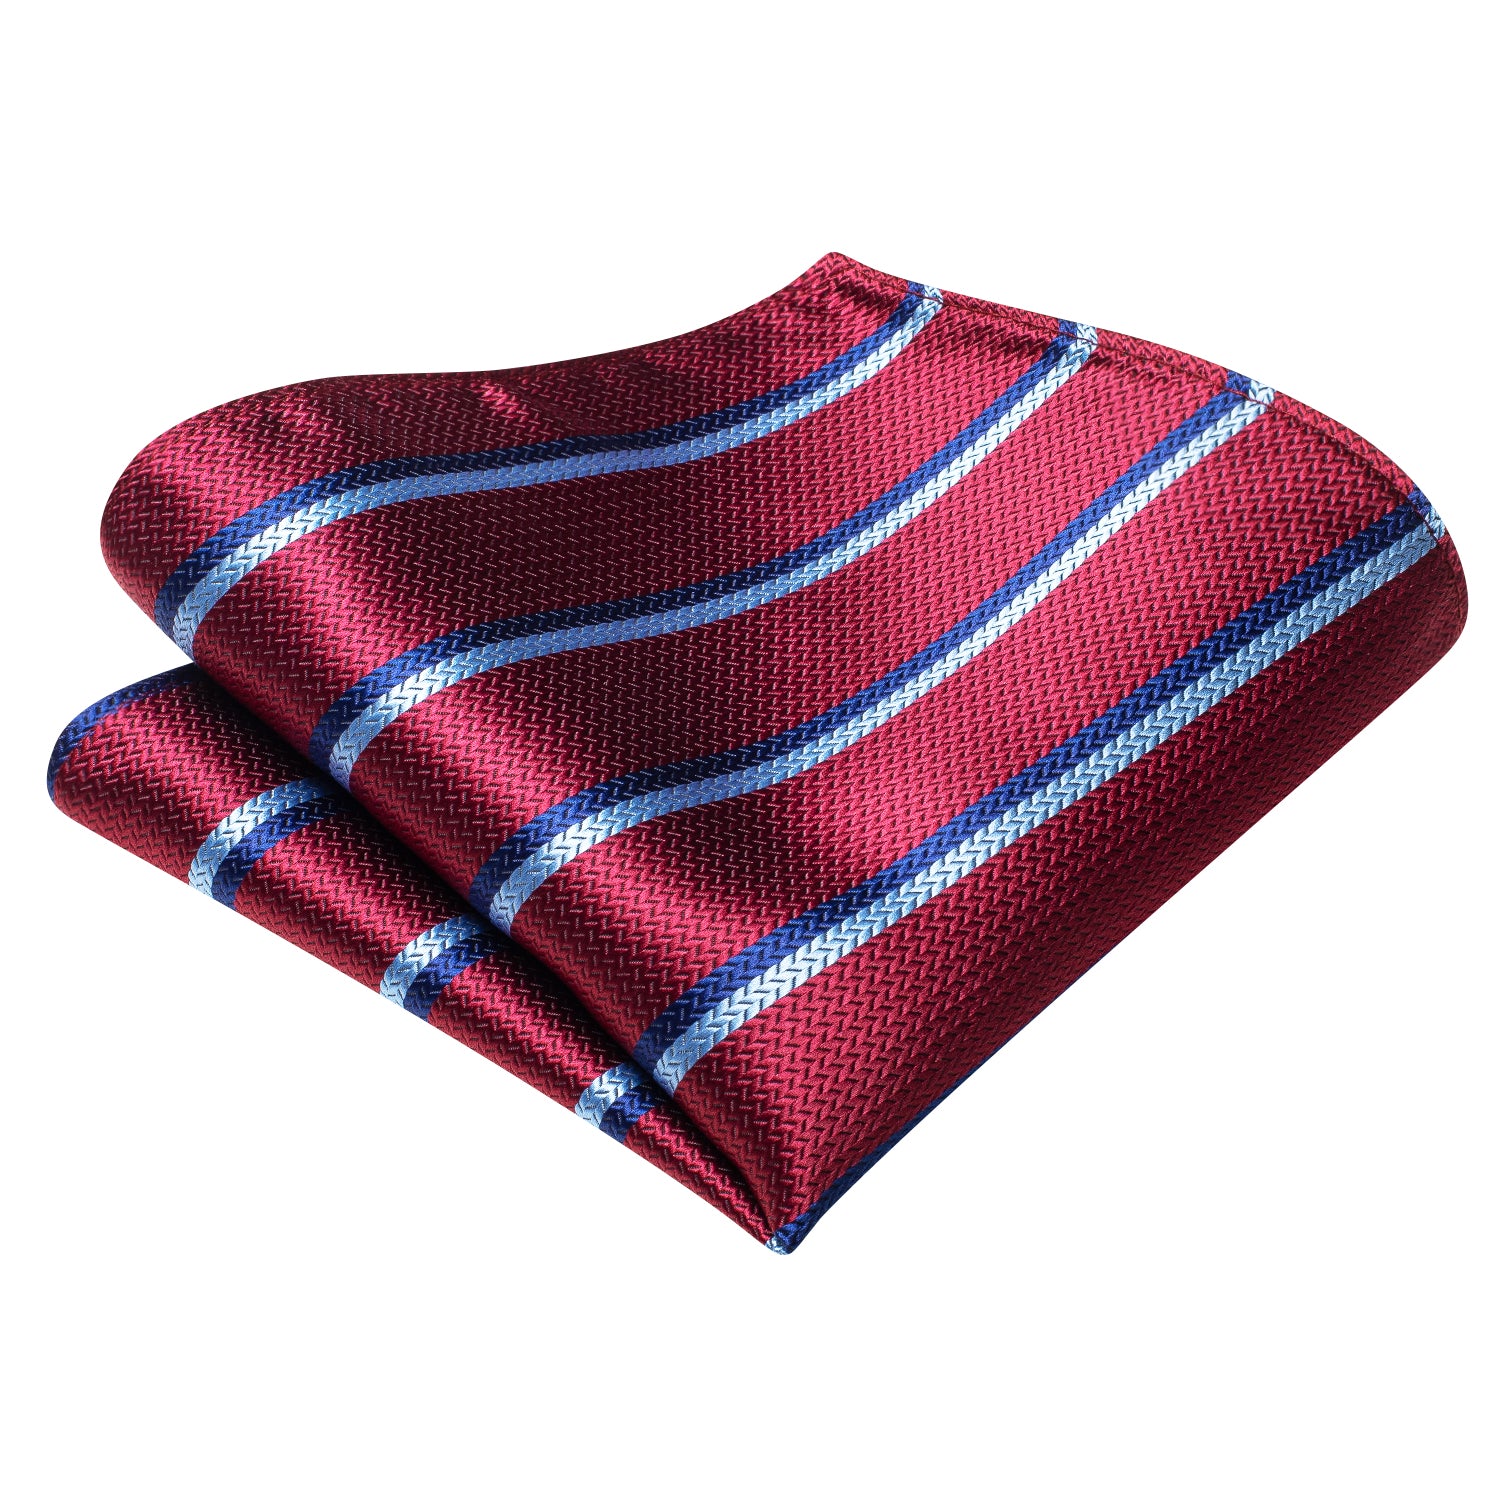 New Red Blue Strip Weave Silk Self-tied Bow Tie Pocket Square Cufflinks Pin Set